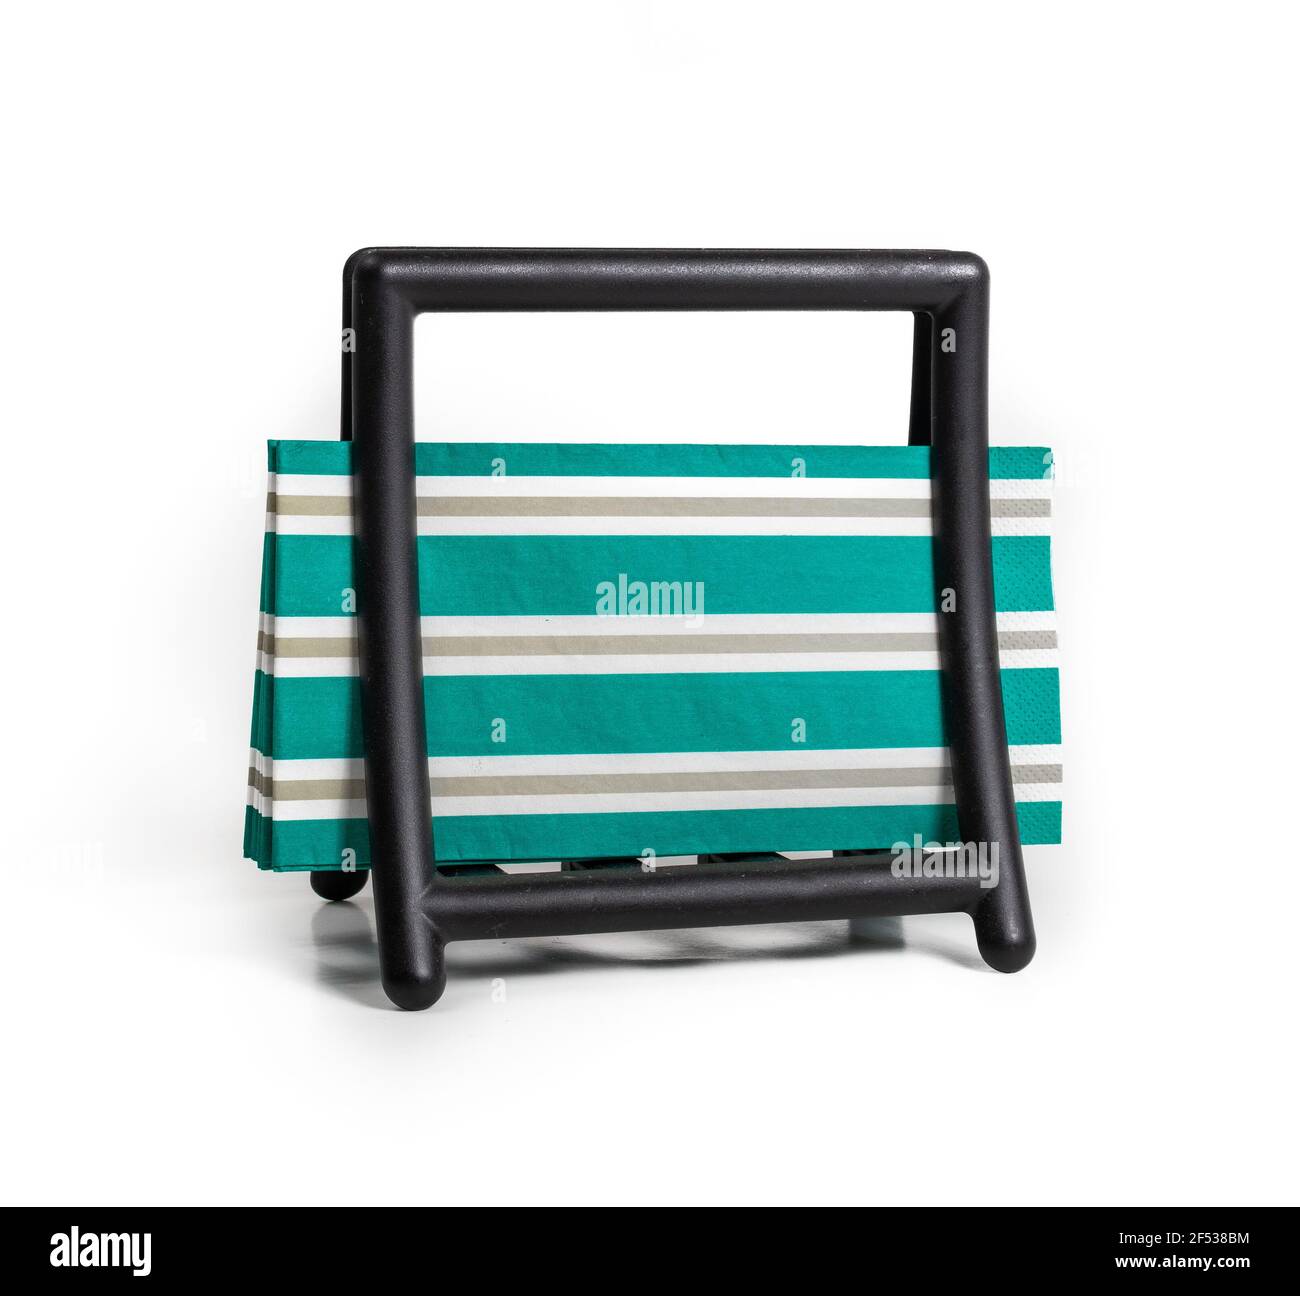 Napkin holder with napkins. Simple modern black napkin dispenser with green yellow striped napkins. Used at home, for guest and events. Isolated on wh Stock Photo